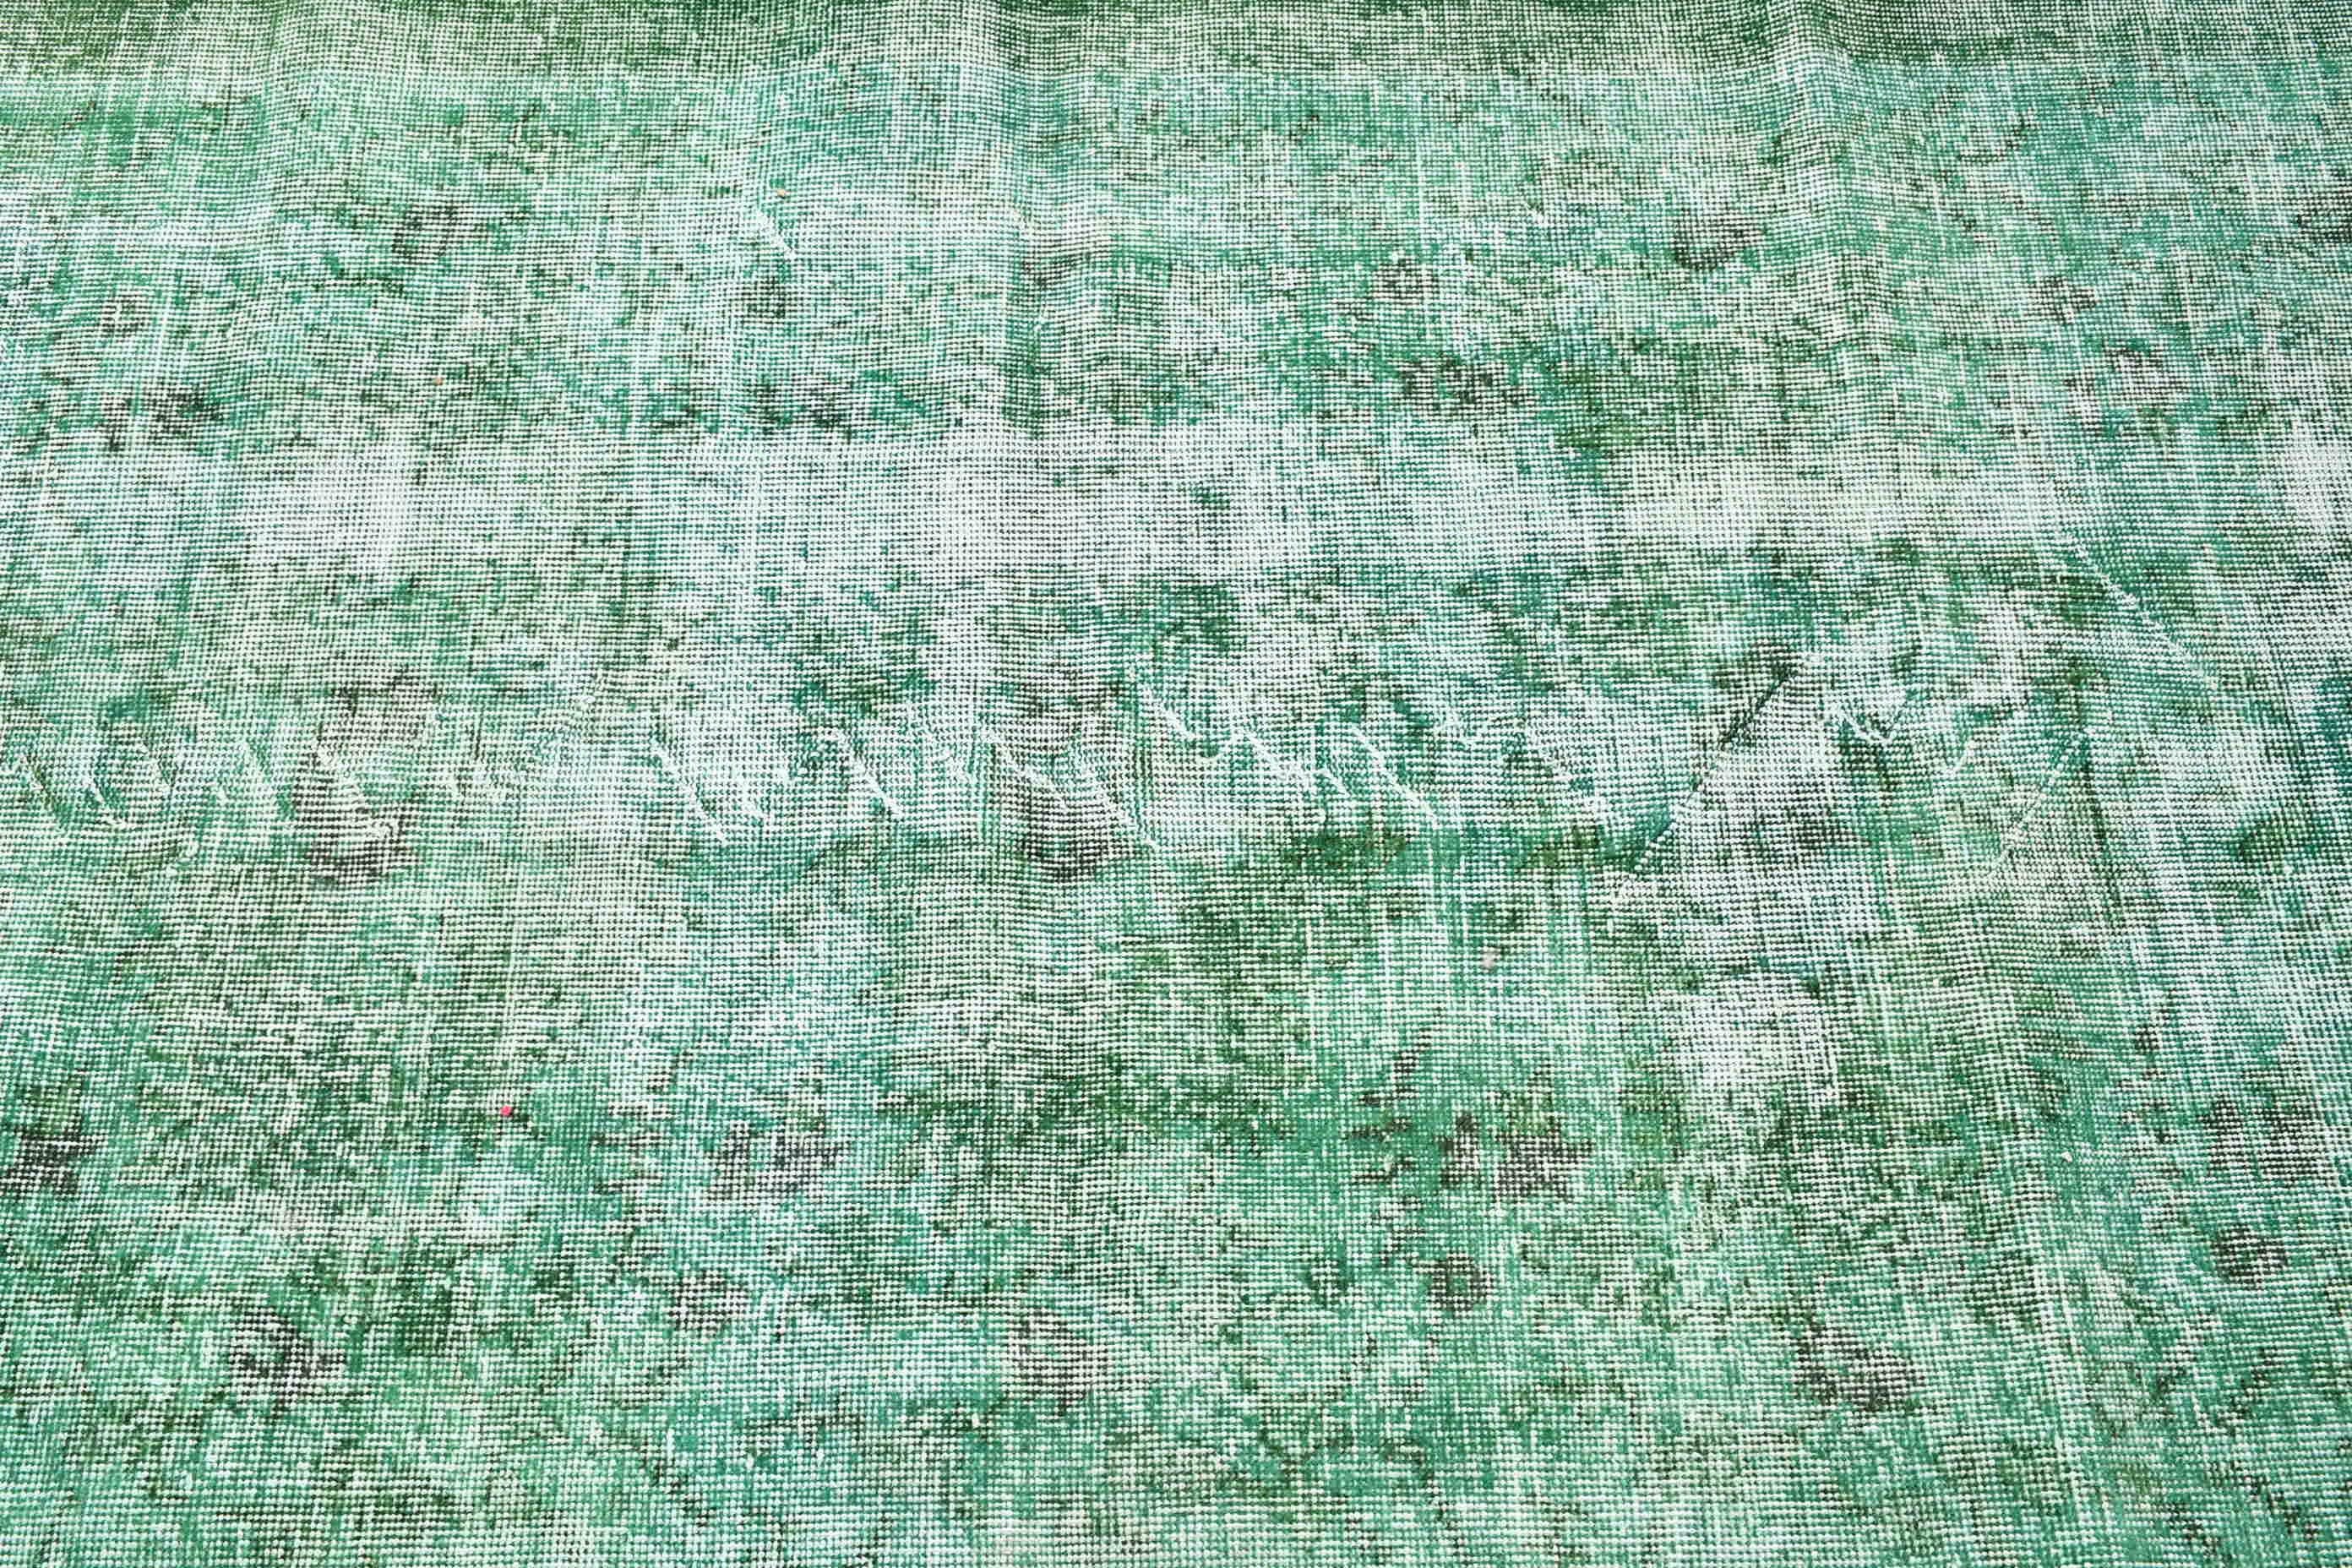 Cool Rug, 3.5x6.3 ft Accent Rugs, Rugs for Entry, Office Rug, Nursery Rug, Kitchen Rug, Turkish Rug, Vintage Rug, Green Moroccan Rugs